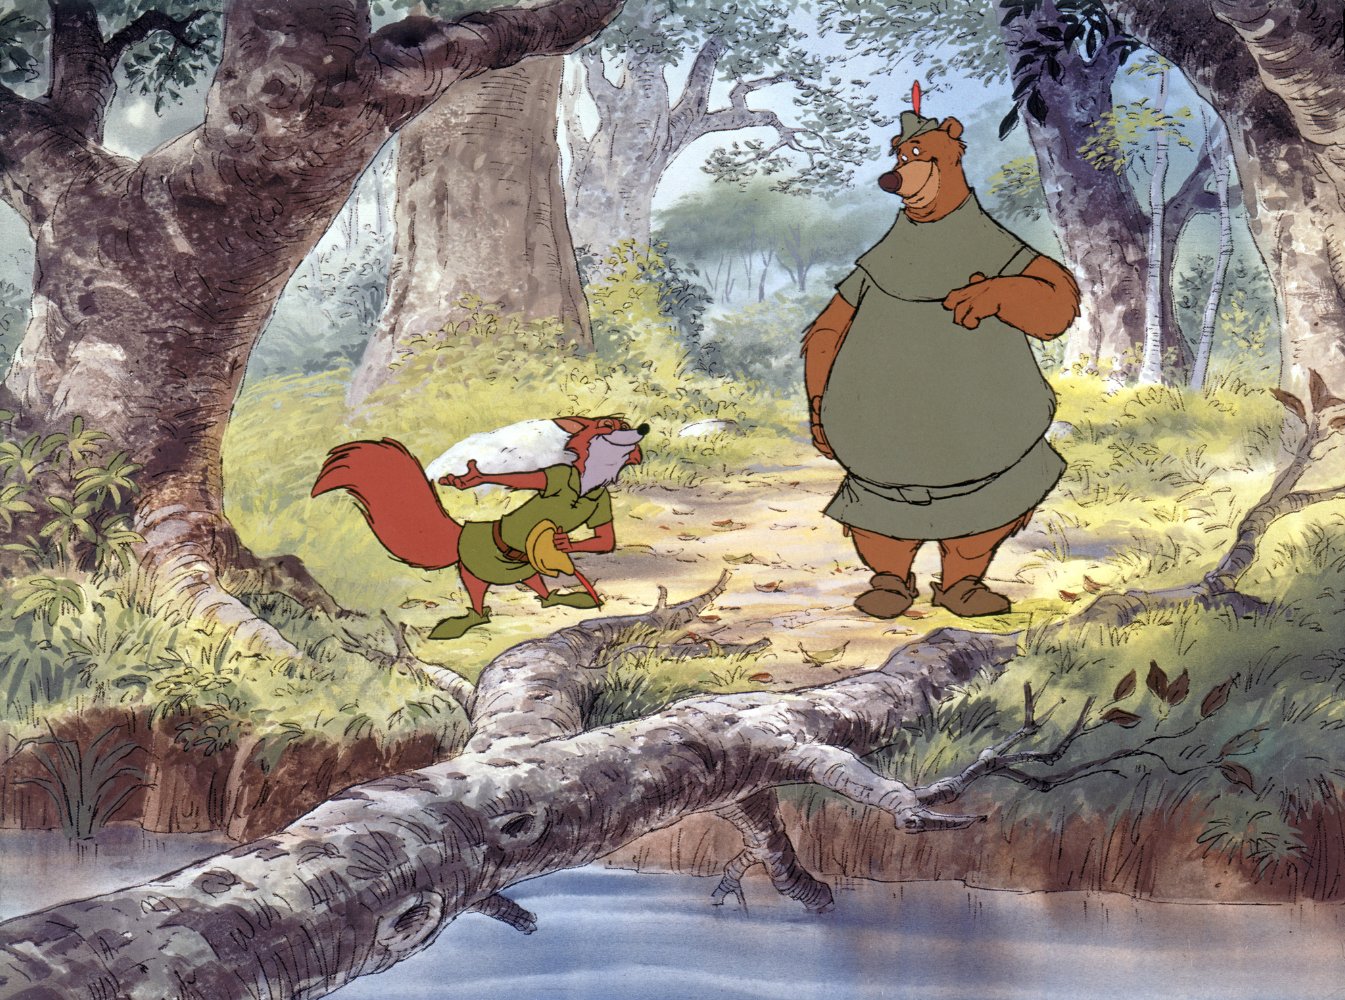 (l to r) The animated Robin Hood (voiced by Brian Bedford) and Little John (voiced by Phil Harris) in Robin Hood (1973)